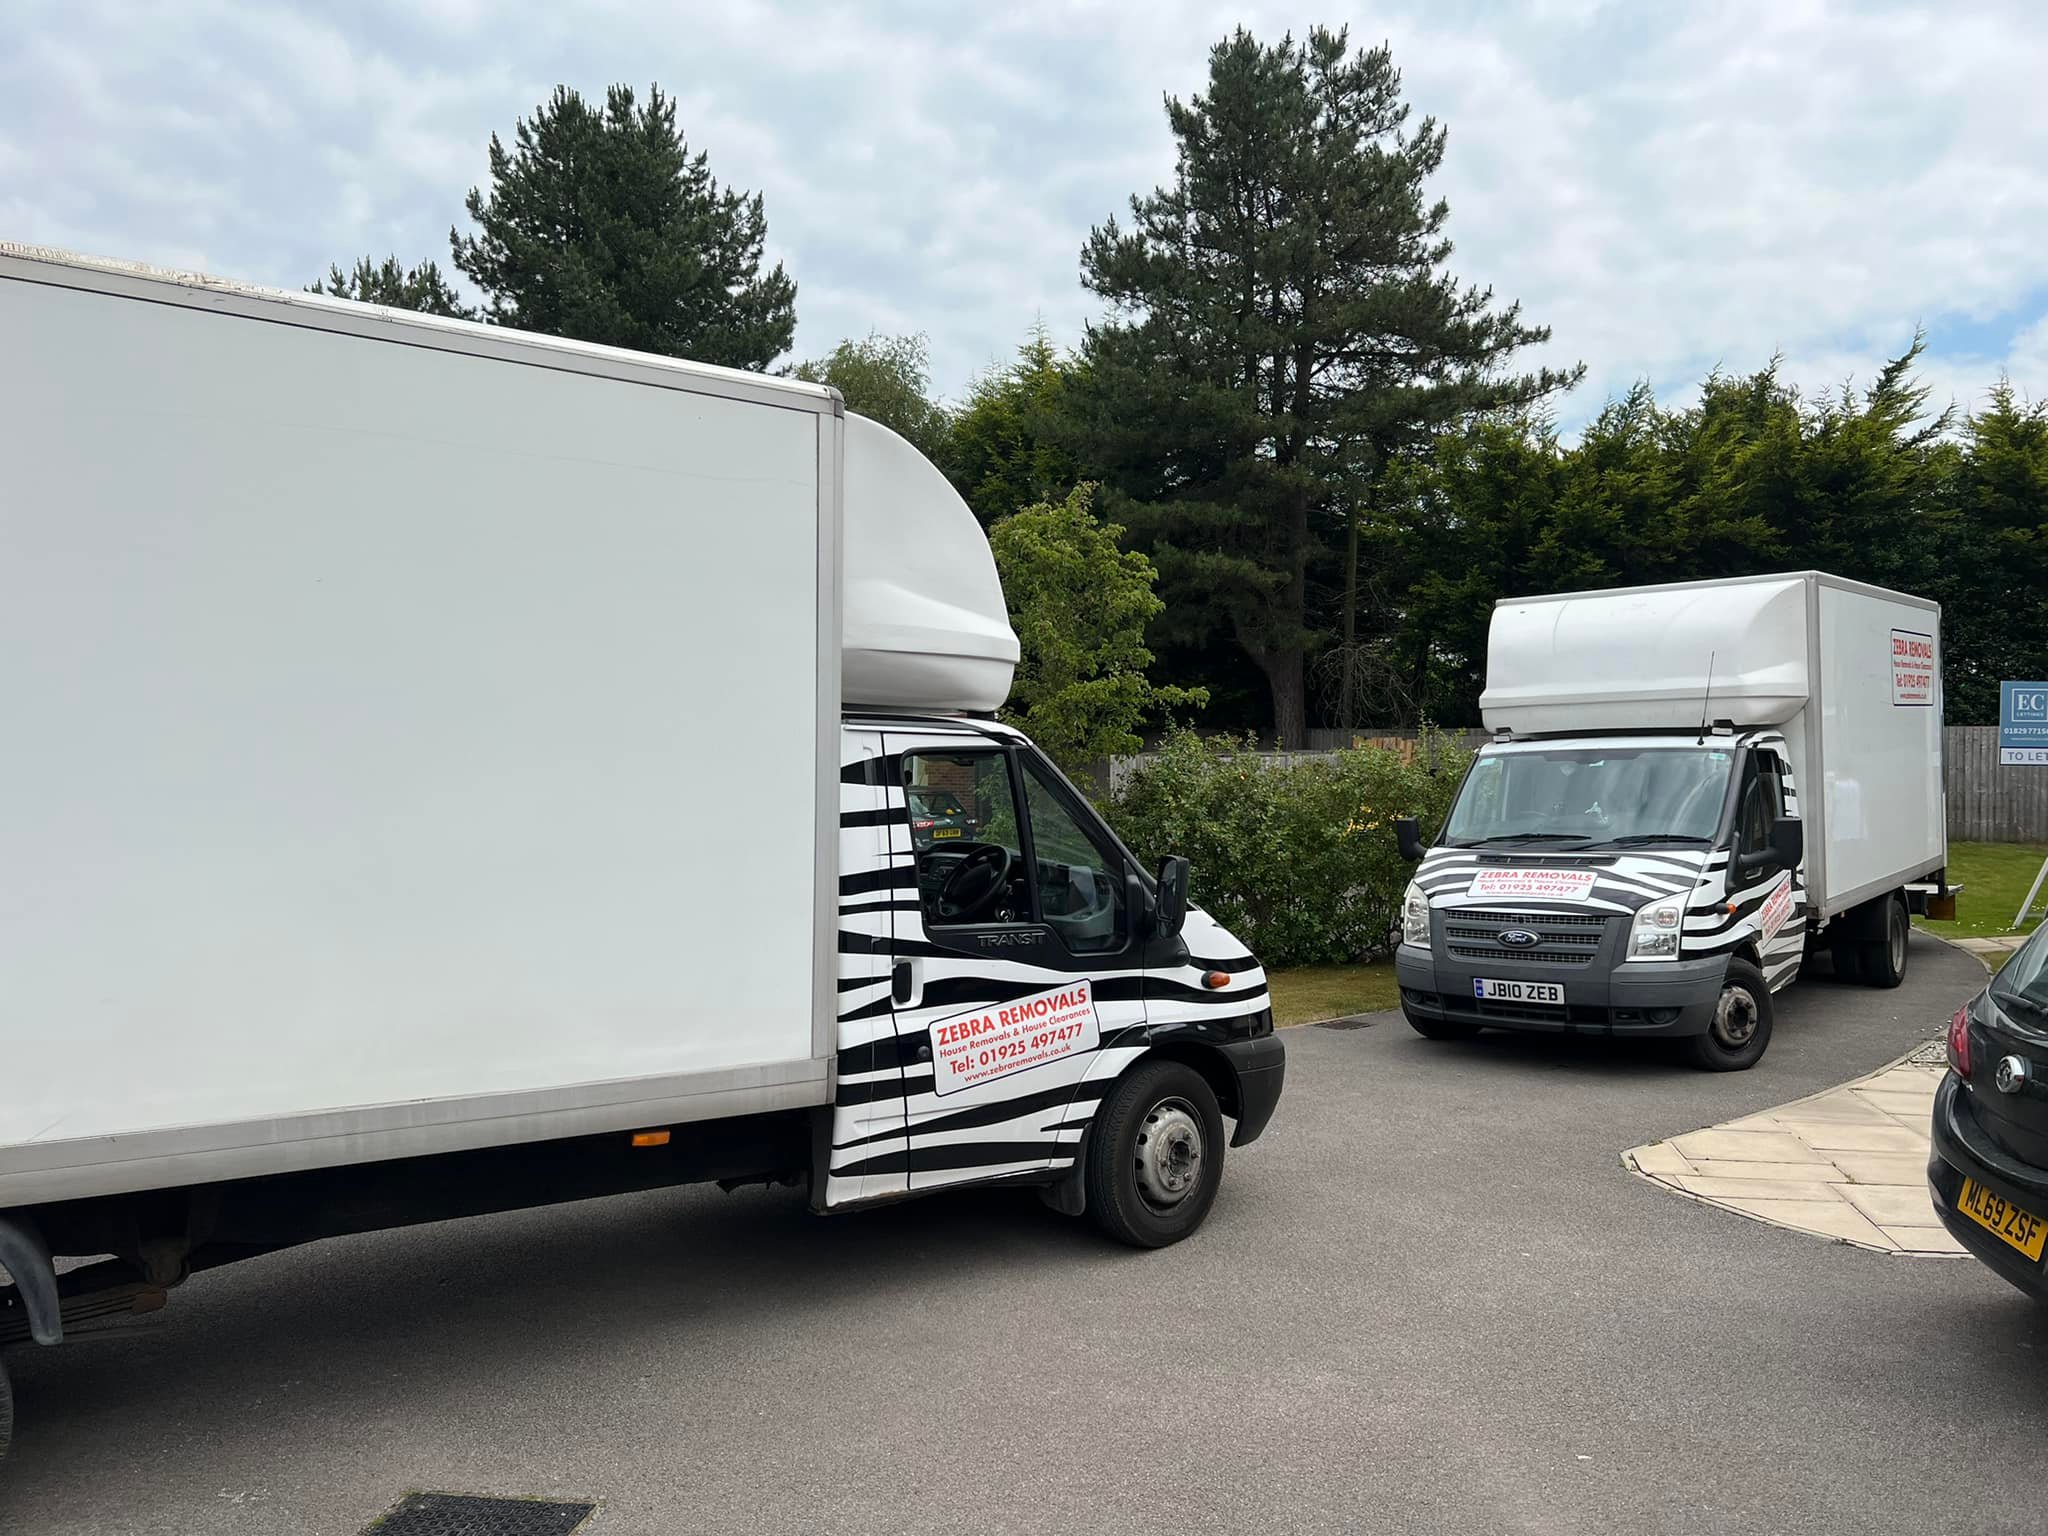 Two vans from Zebra Removals